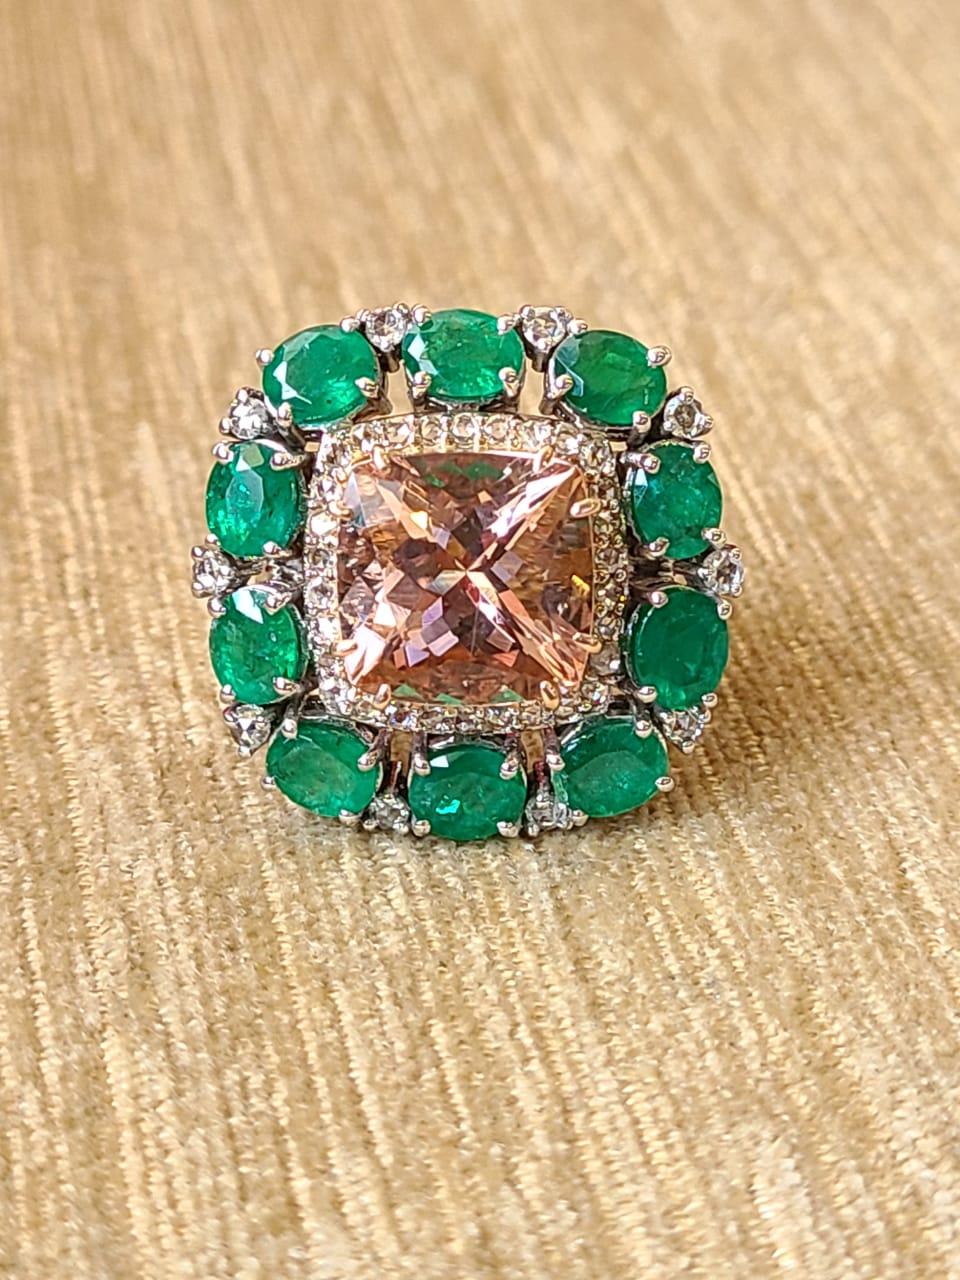 Women's or Men's 4.93 Carats, Cushion Cut Morganite, Emerald & Diamonds Cocktail/Engagement Ring For Sale